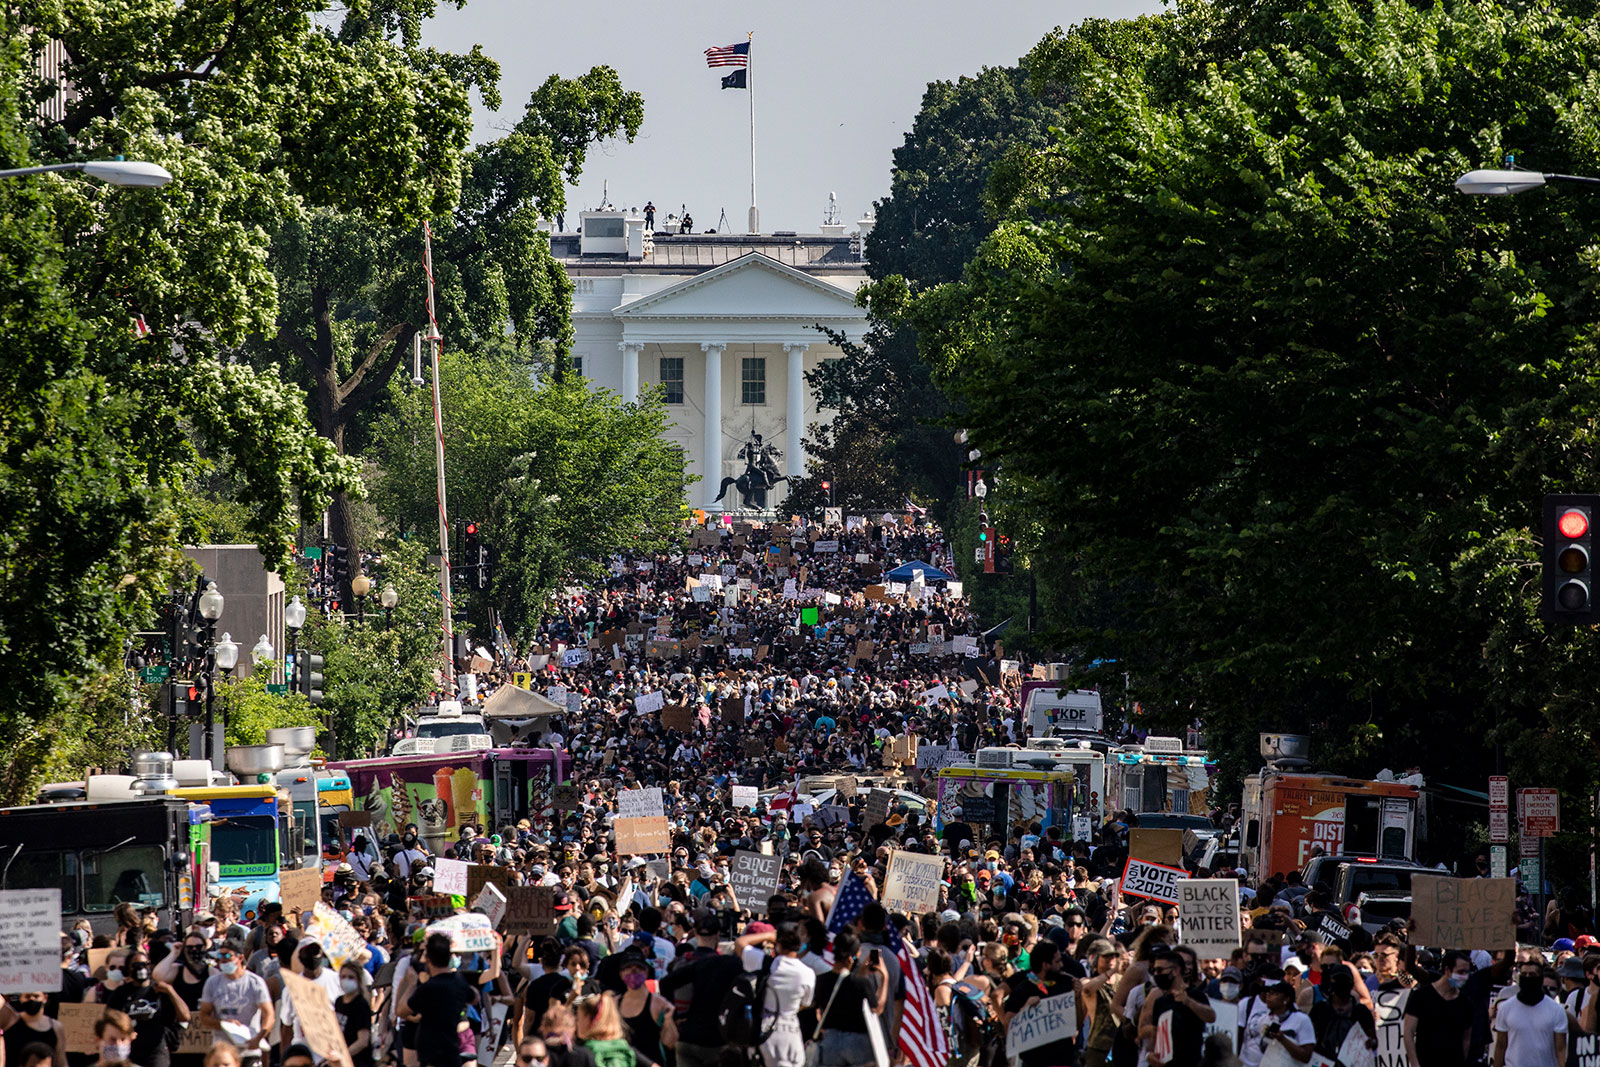 Tens of thousands of people protested in Washington, DC, today